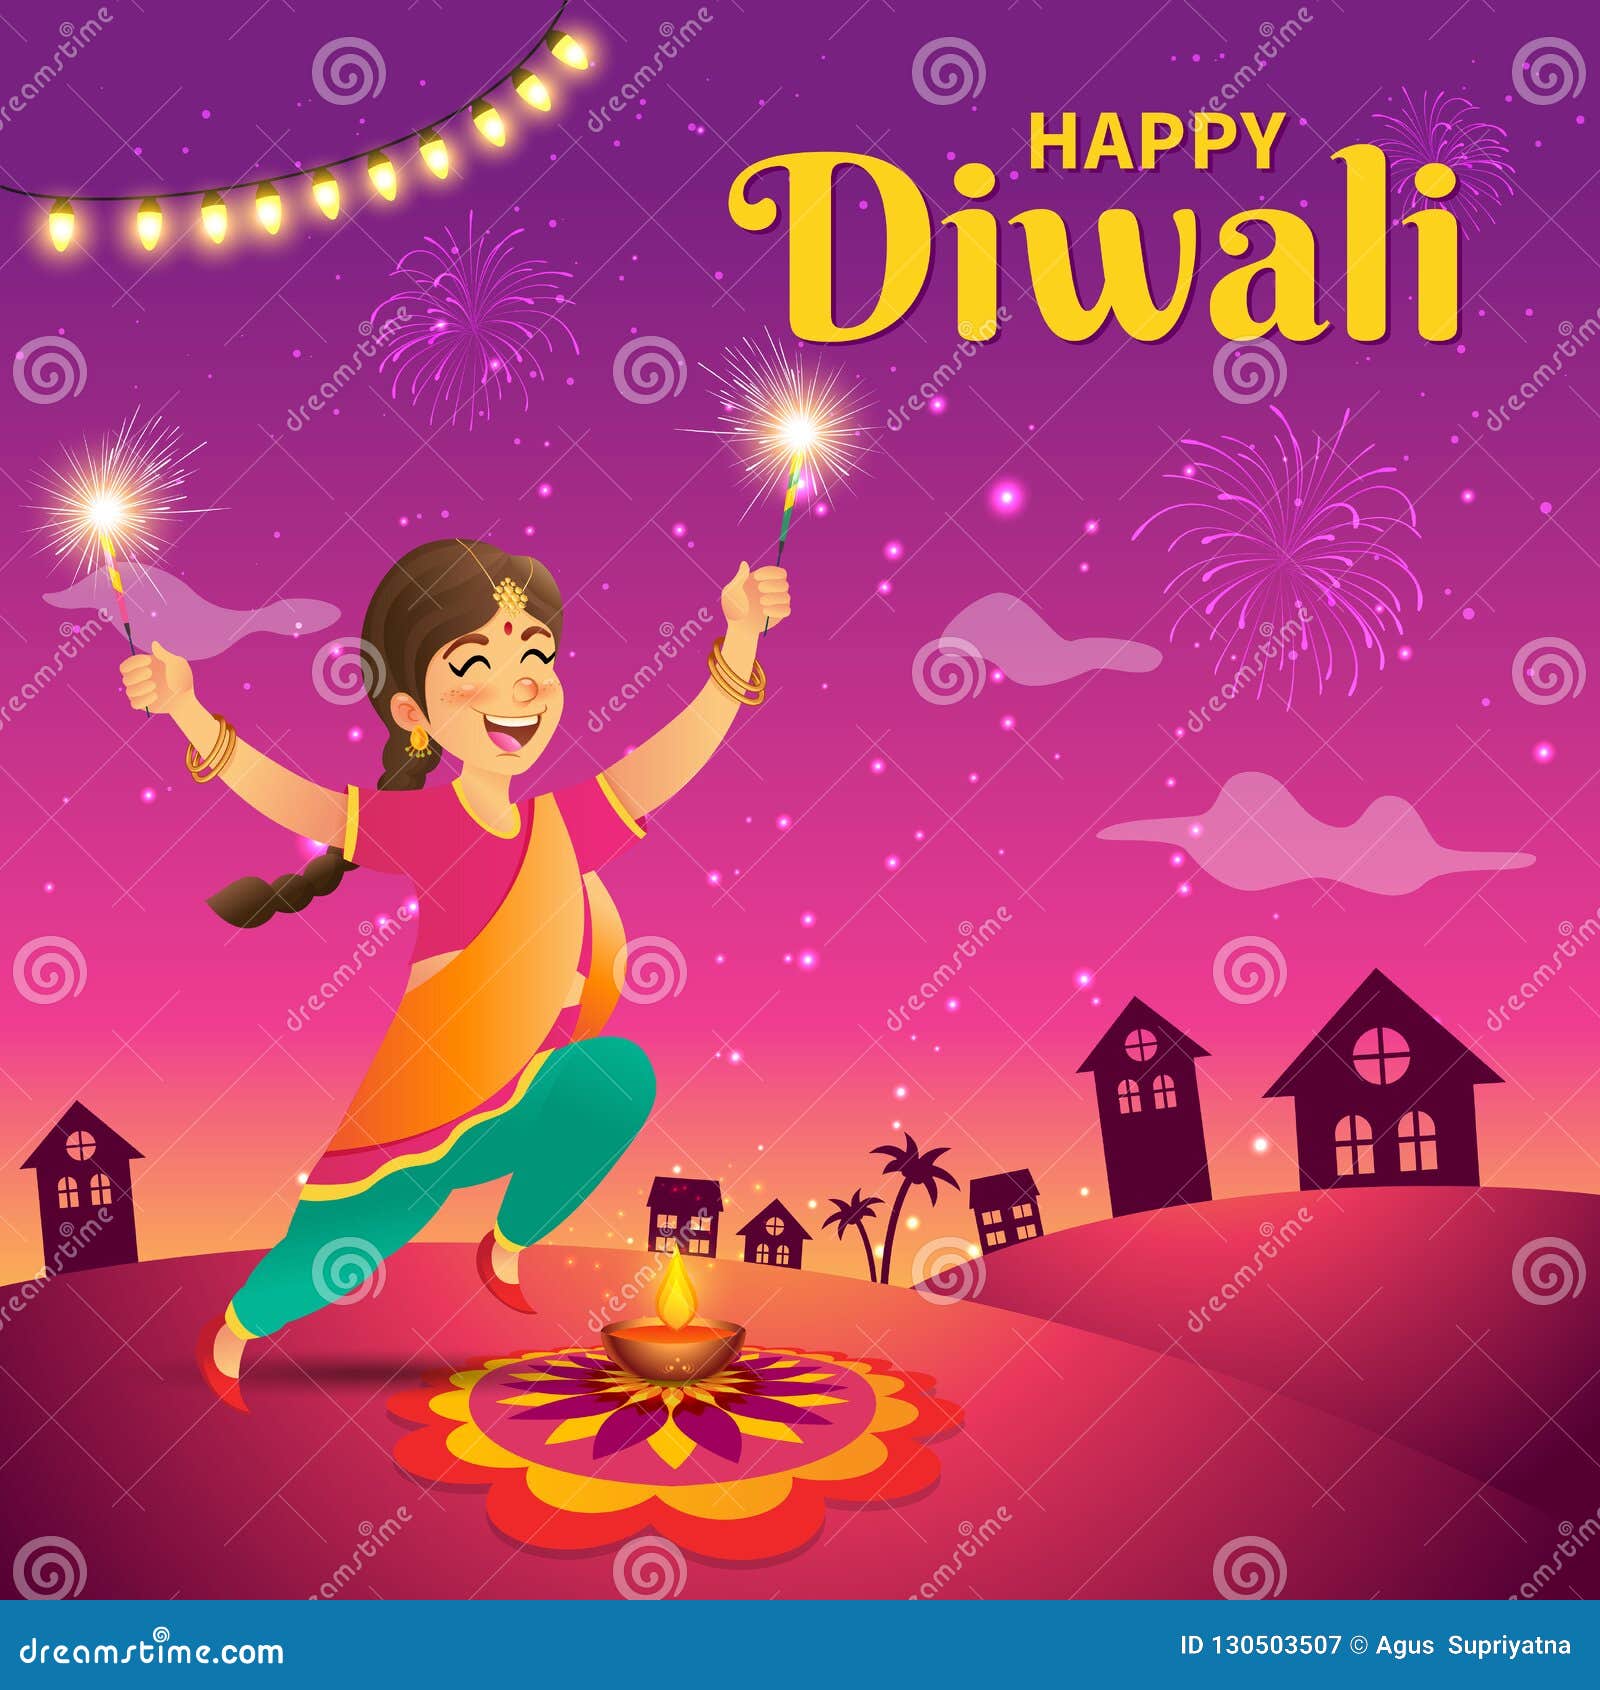 Diwali Greeting Card with Cartoon Indian Kids Stock Vector - Illustration  of culture, girl: 130503507